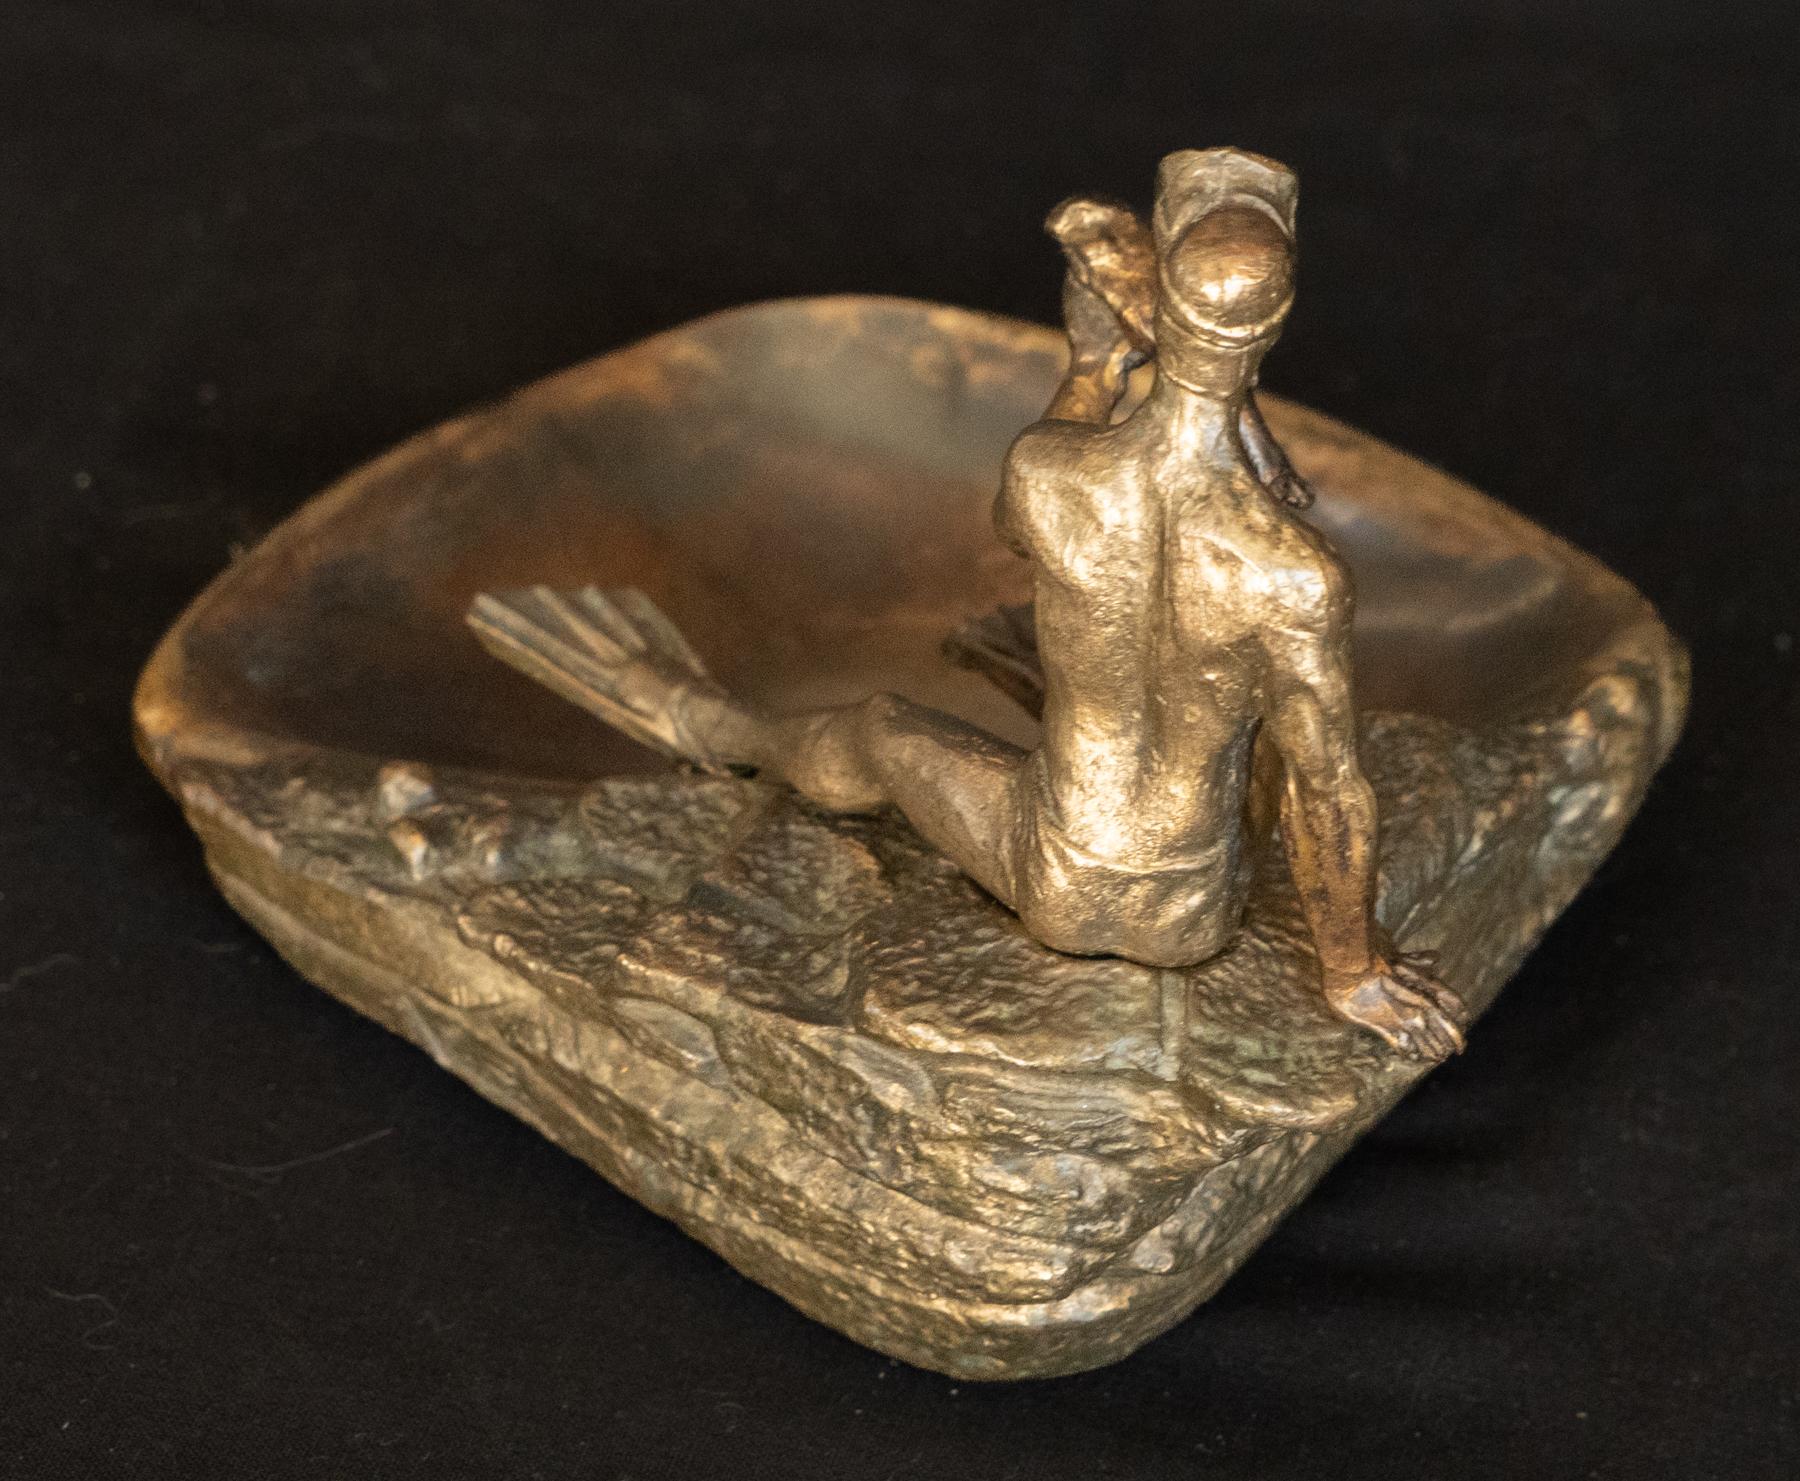 Cast Midcentury Russian Bronze Tray with a Scuba Diver Holding a Fish For Sale